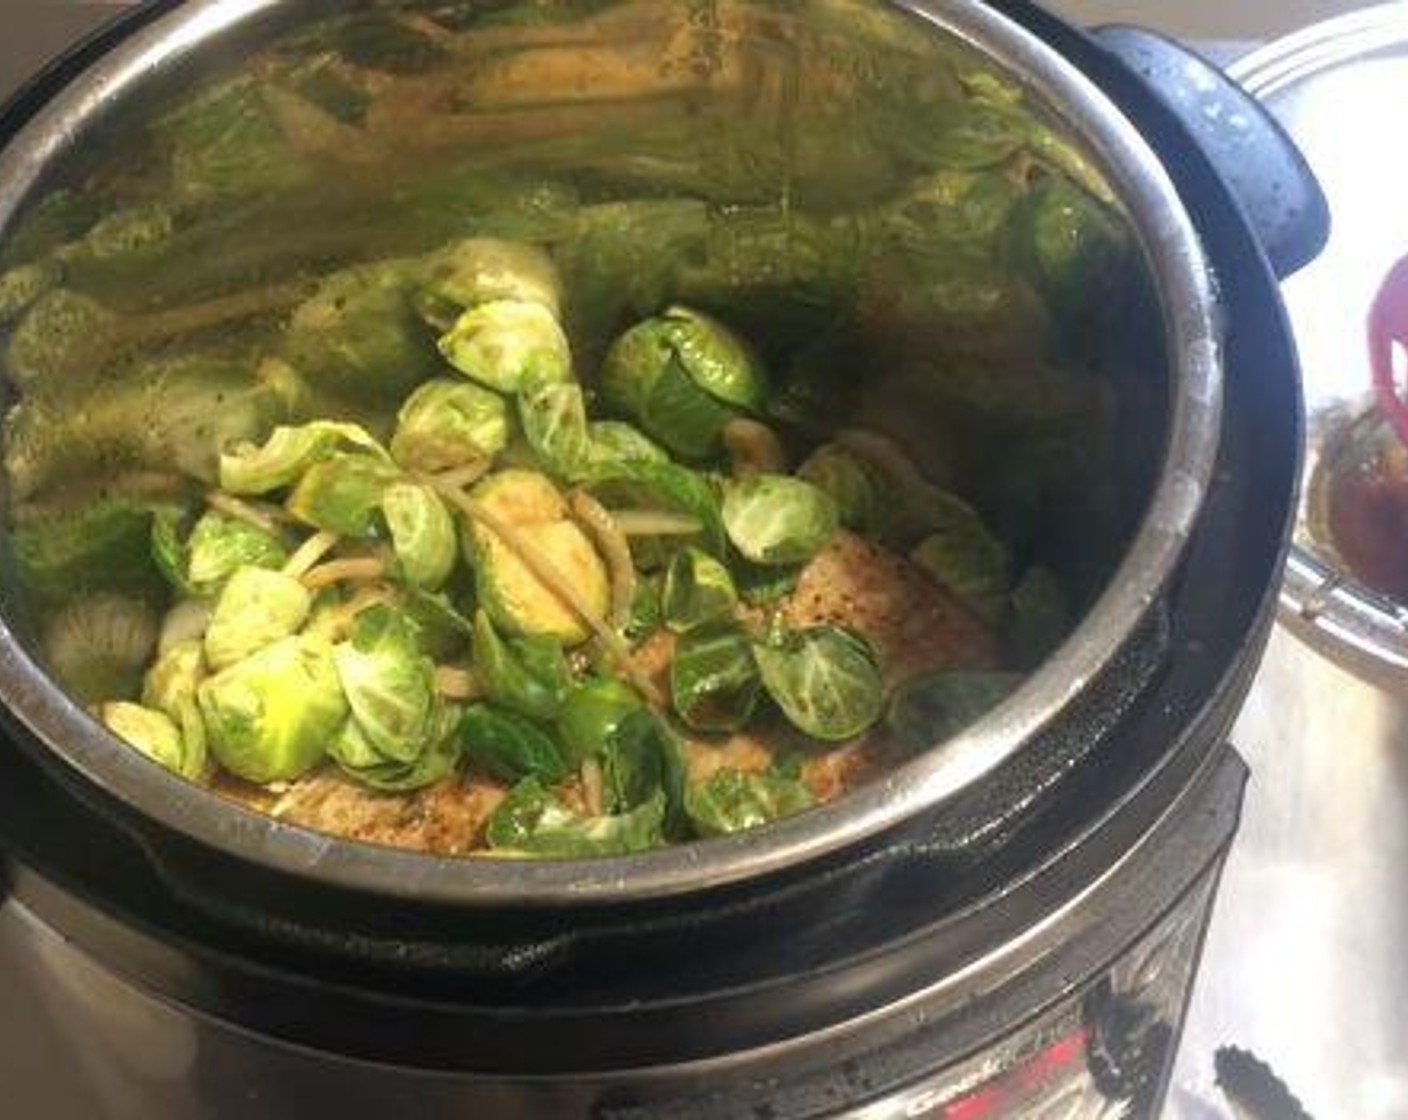 step 4 Add your Brussell sprouts, leftover sauce mixture into the pressure cooker. Add some Water (1/2 cup) and cook everything for 7 minutes under pressure.